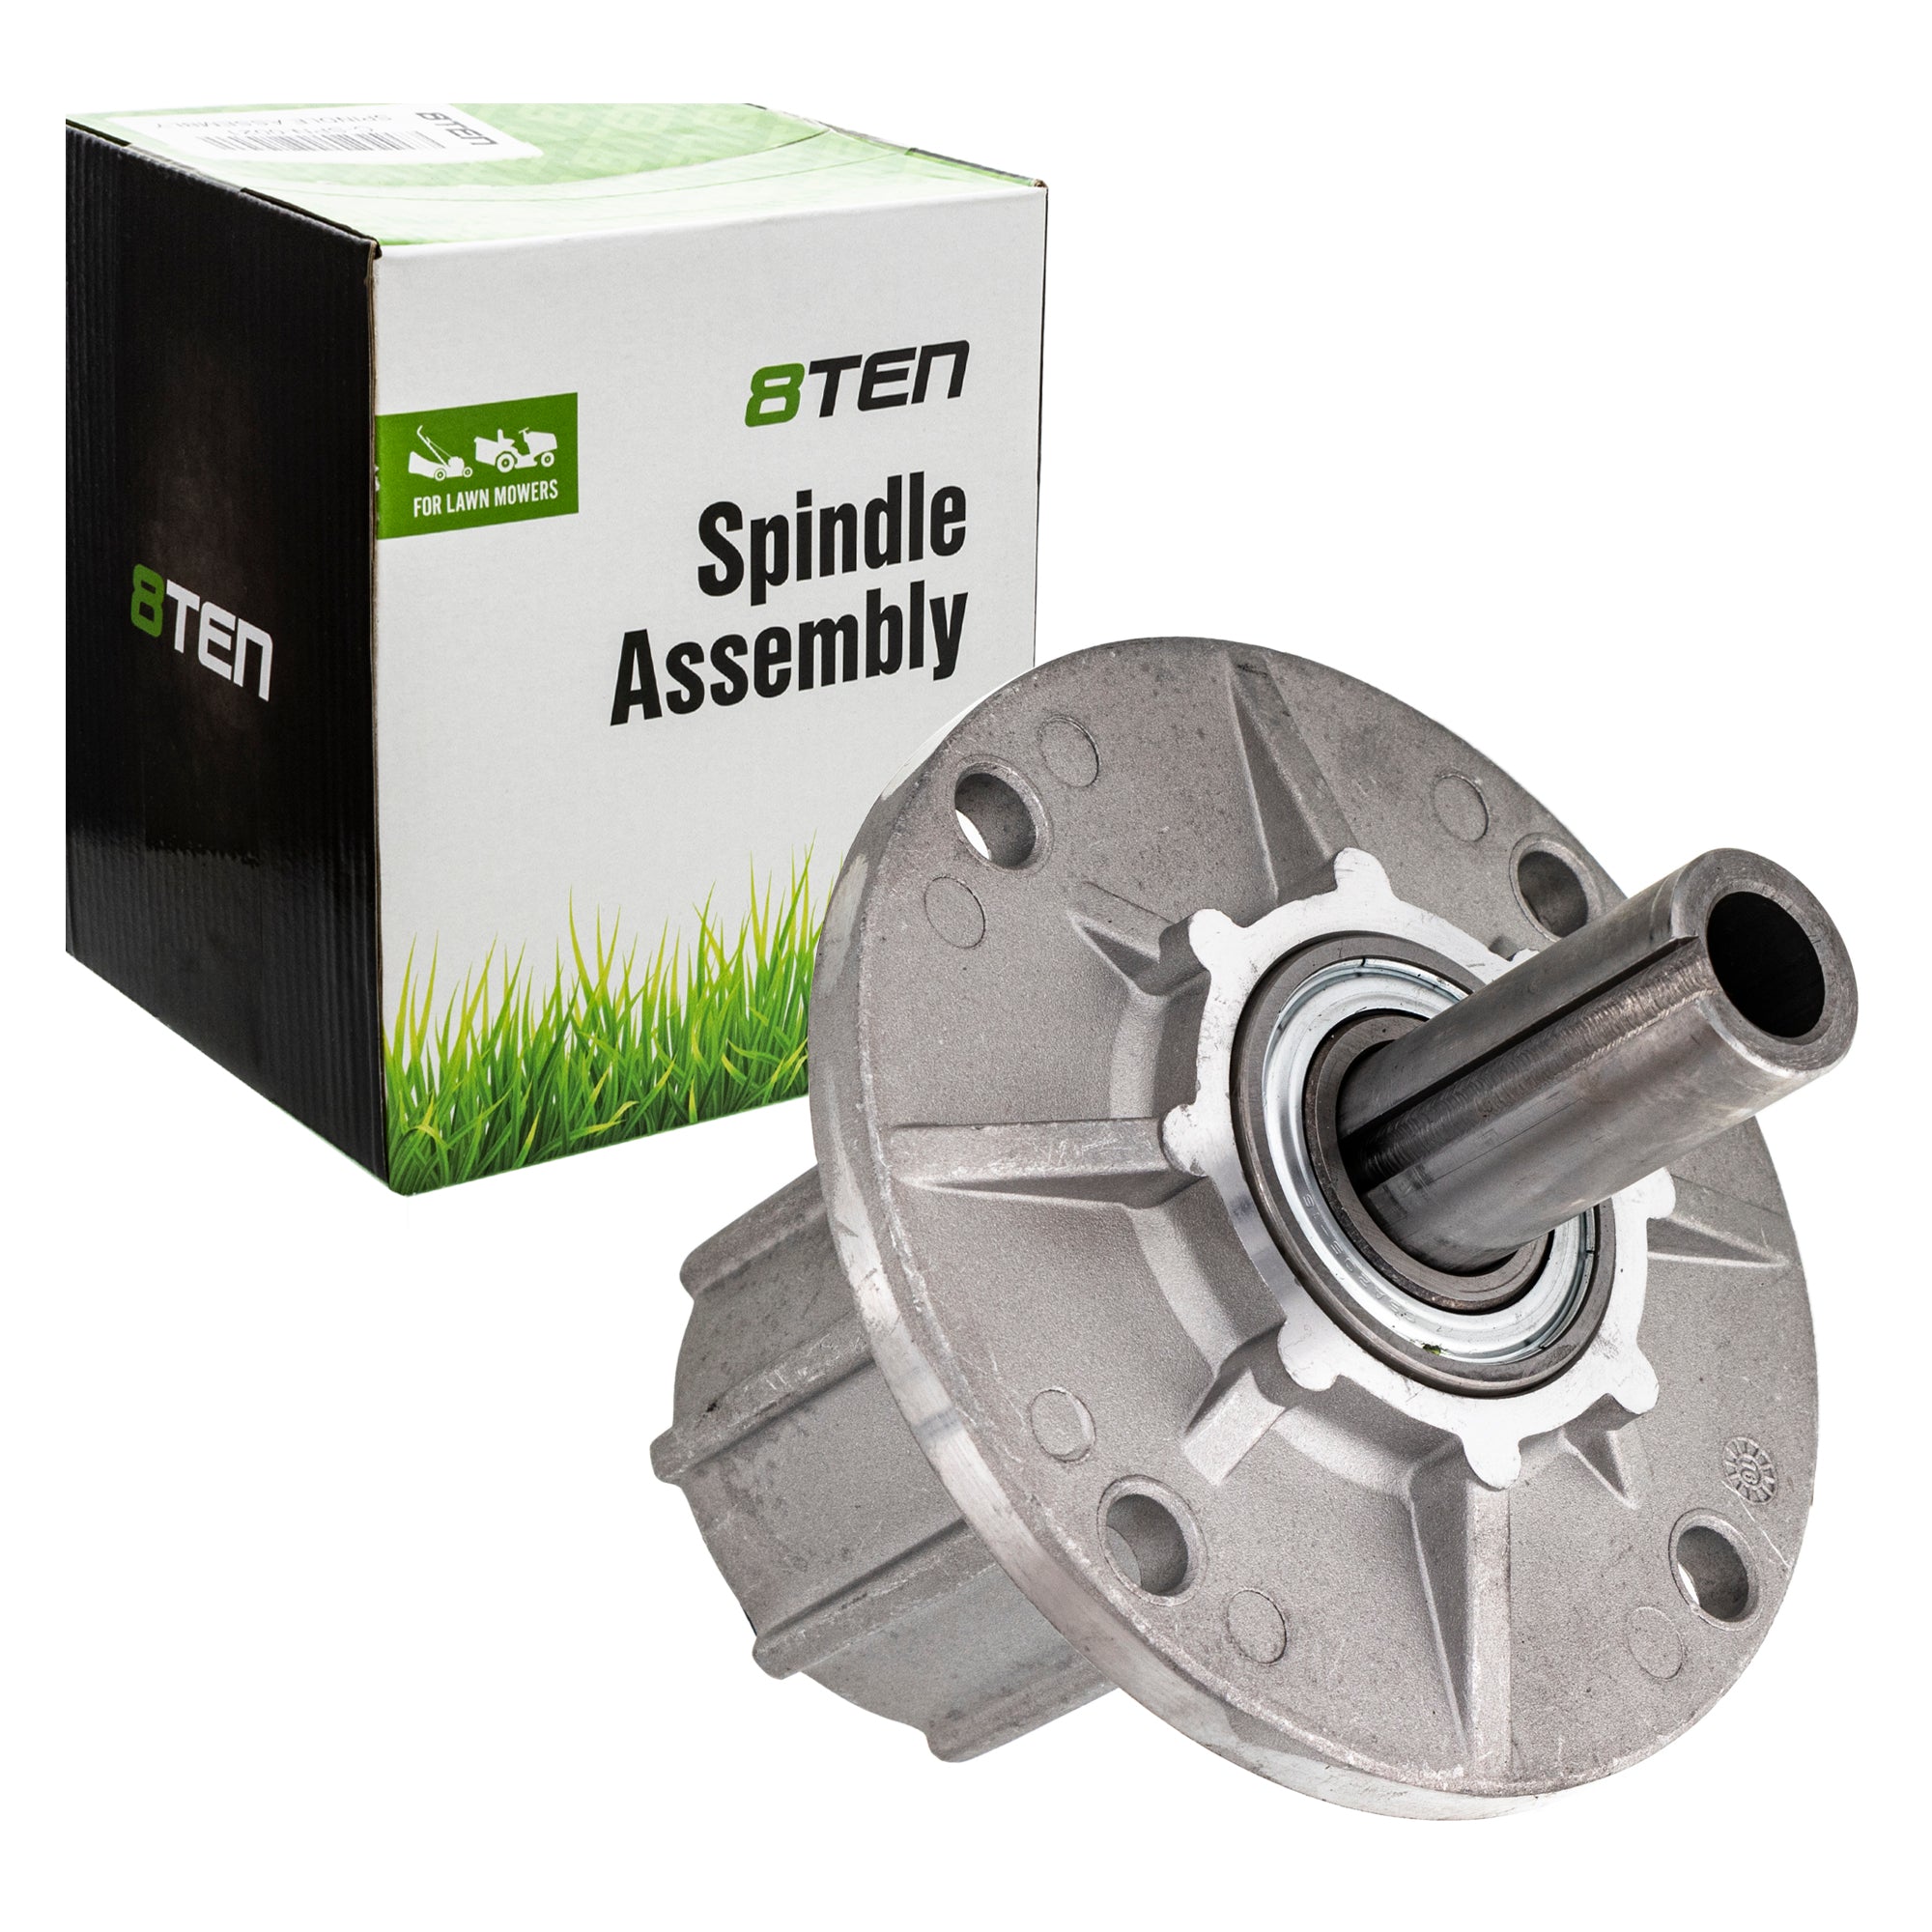 8TEN 810-CSP2299N Deck Spindle Set 2-Pack for zOTHER Tecumseh Stens